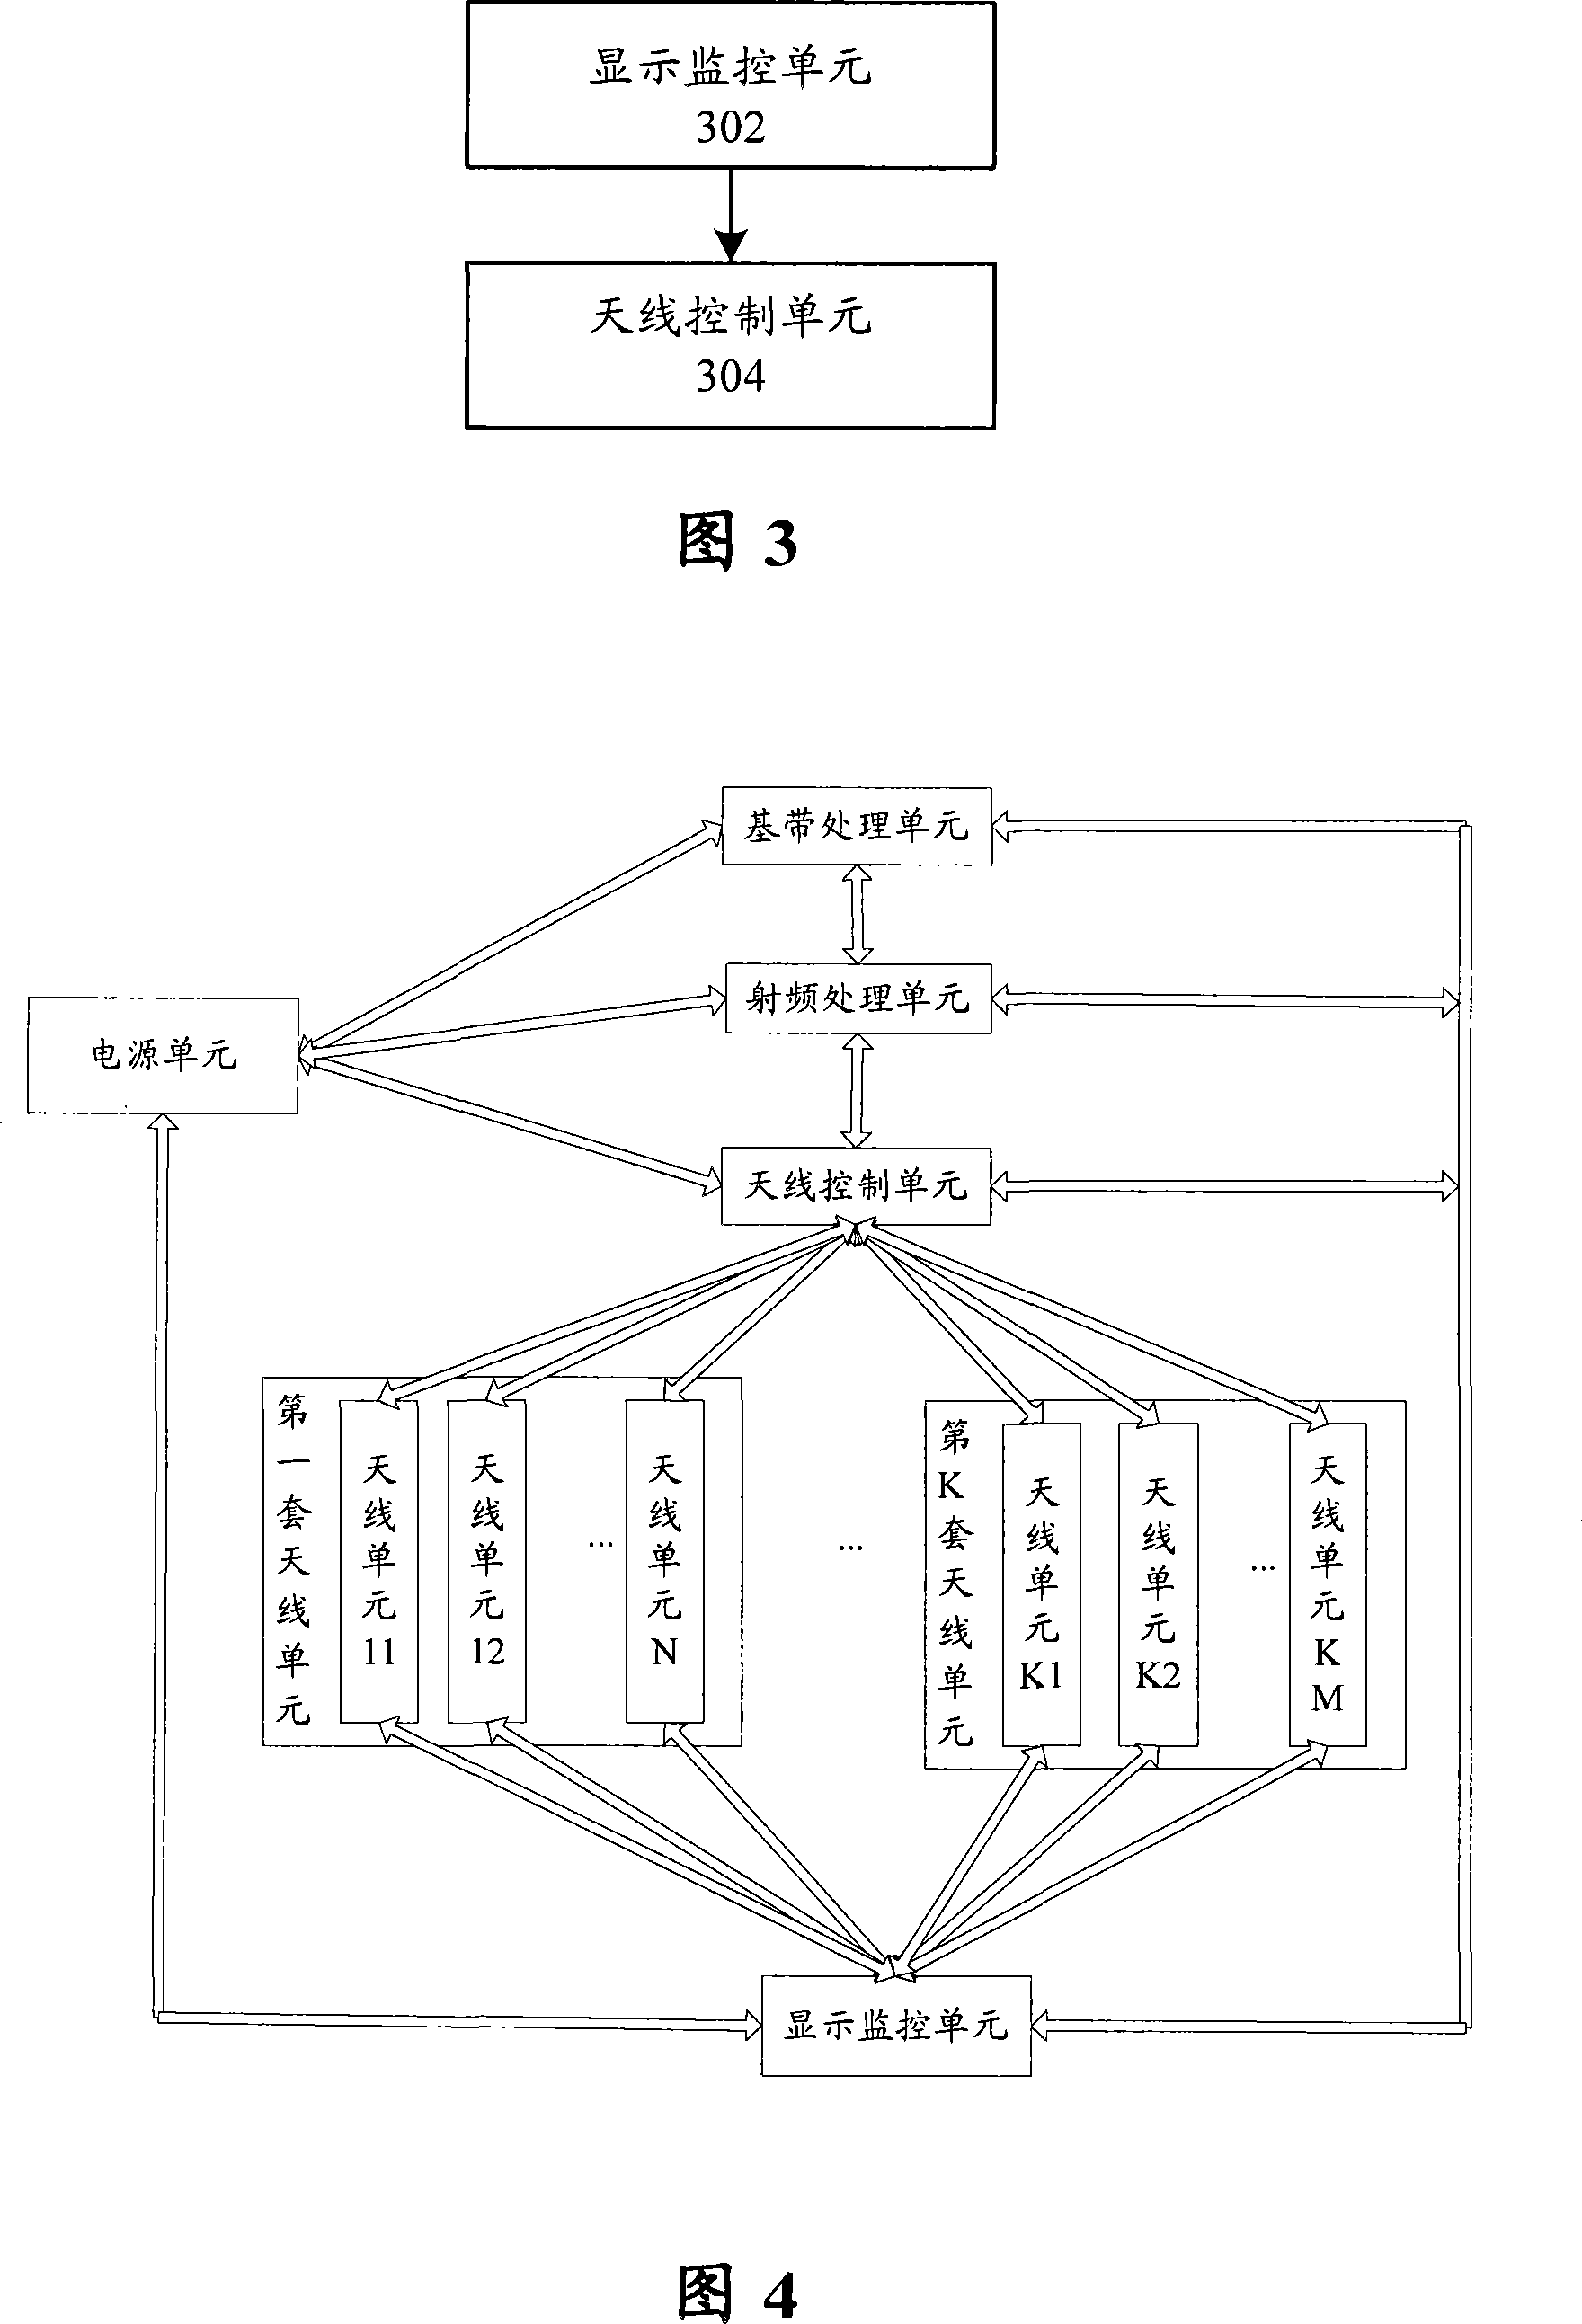 Signal transmitting and receiving method and device